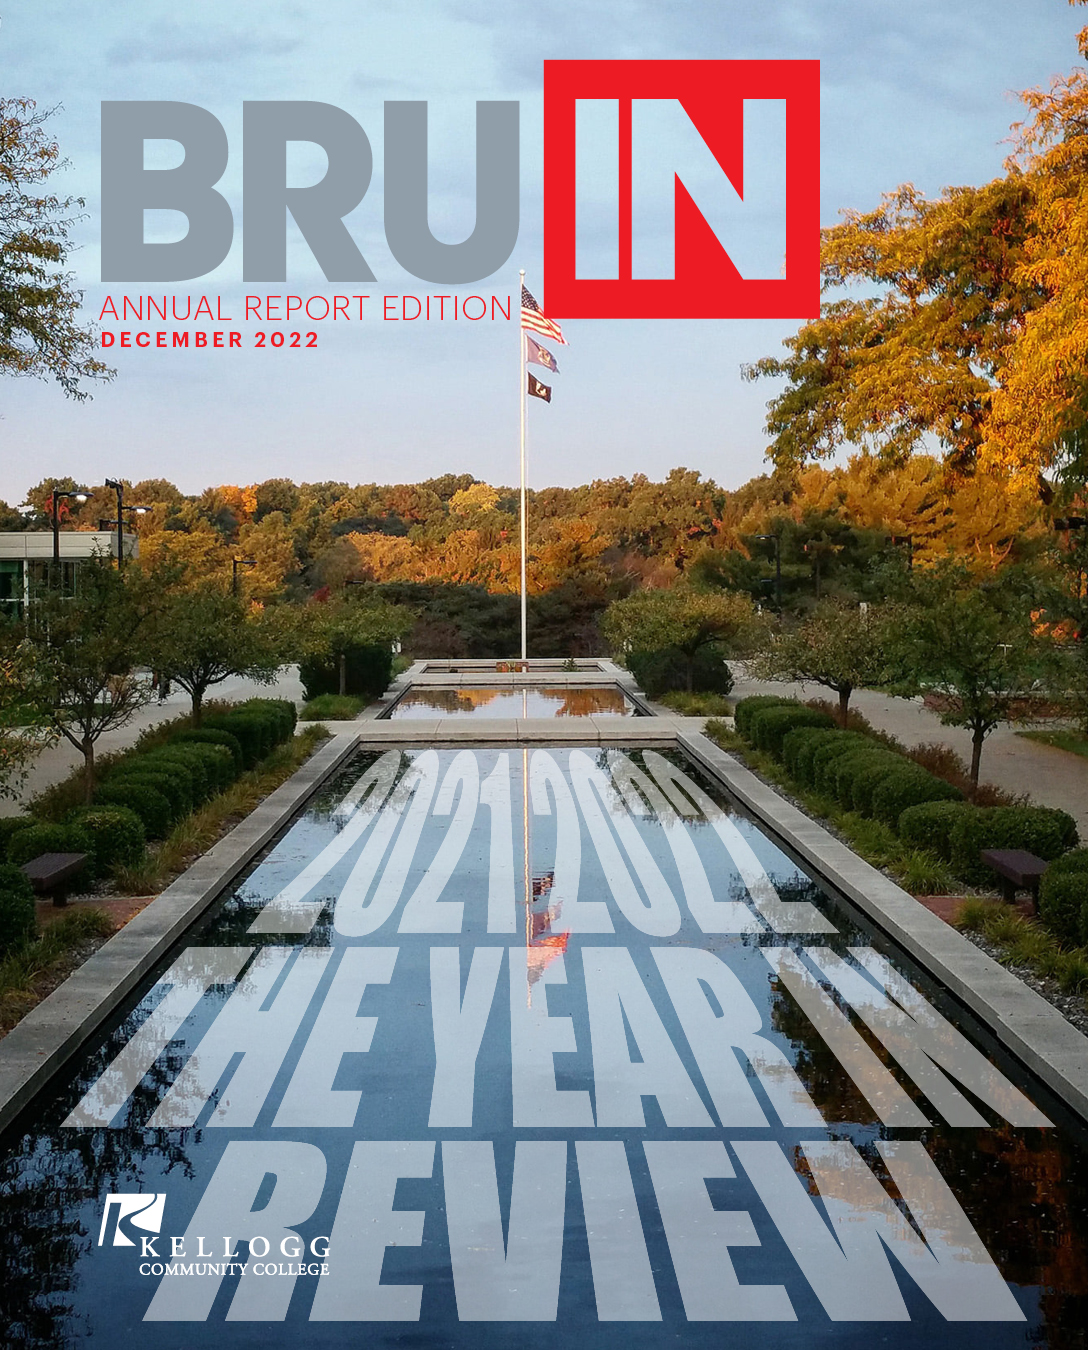 An image of the cover of BruIN magazine annual report issue dated December 2022.